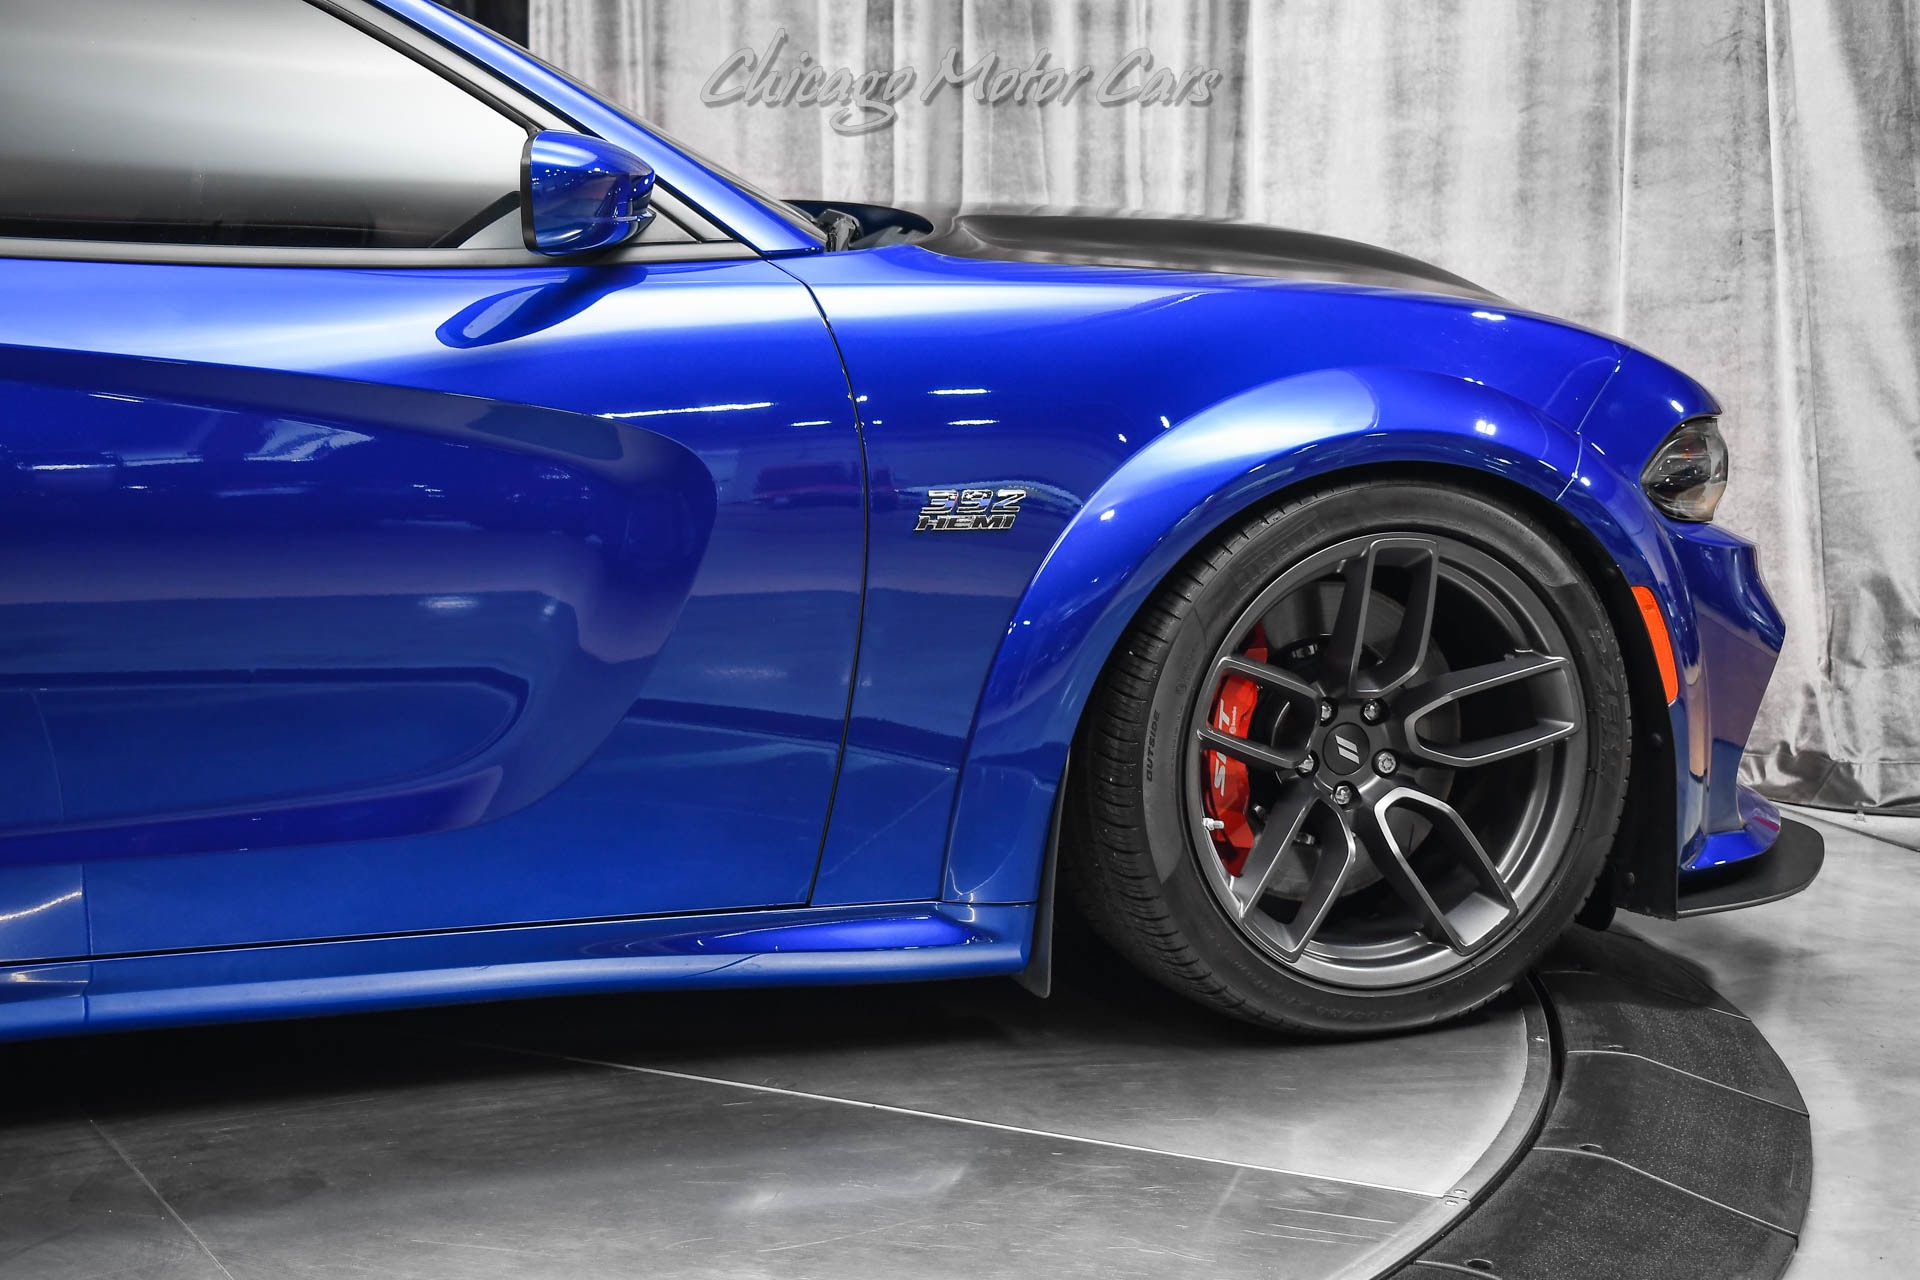 Used-2021-Dodge-Charger-Scat-Pack-Widebody-Indigo-Blue-Tastefully-Upgraded-MBRP-Exhaust-Carbon